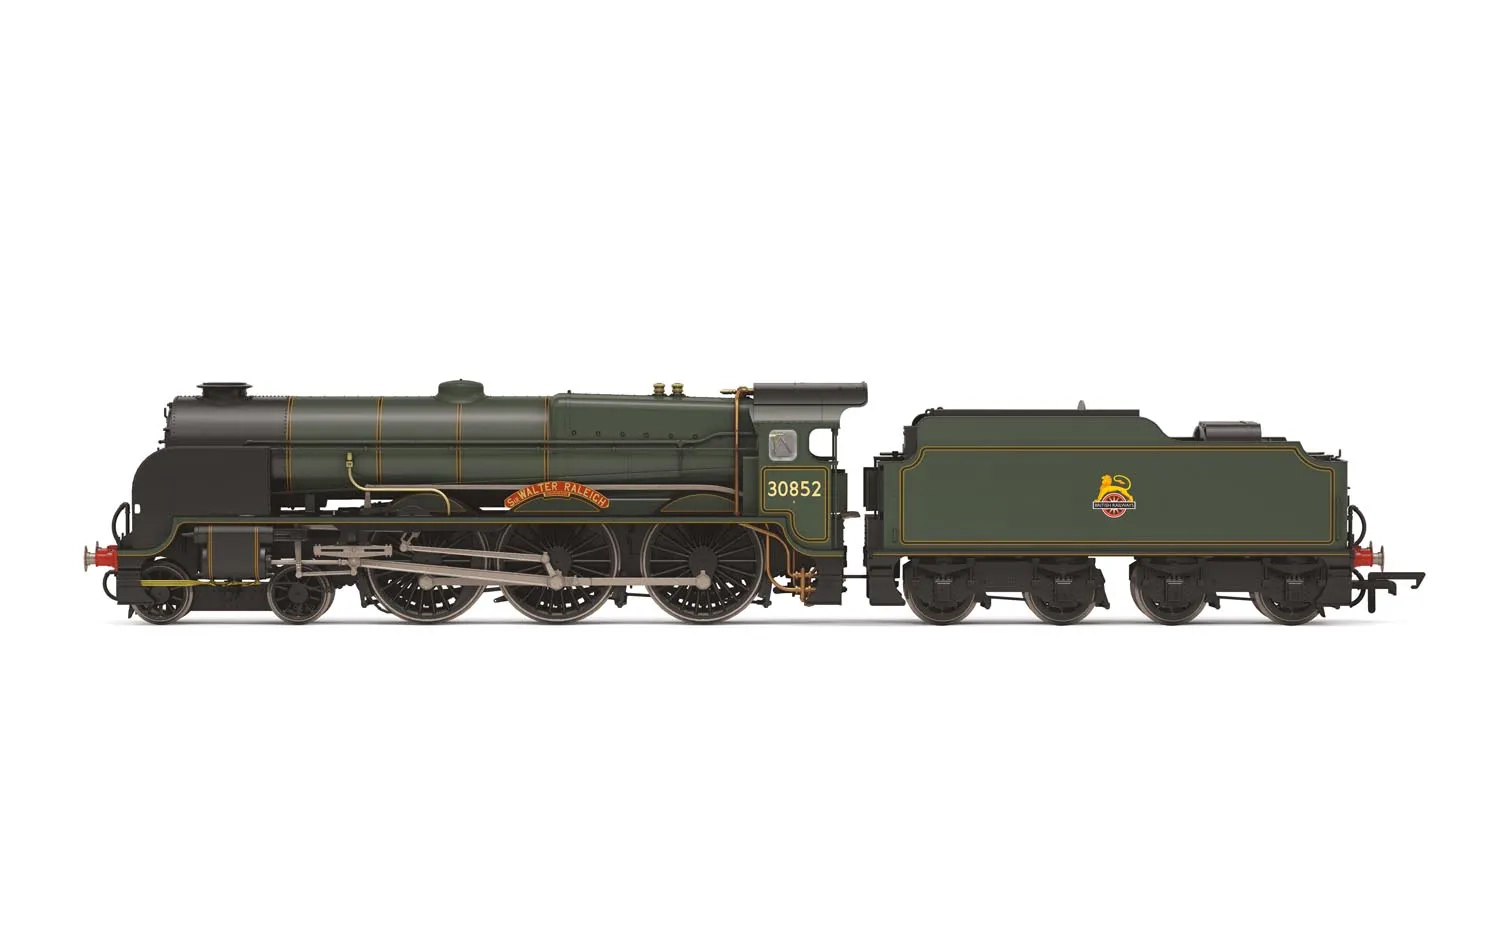 BR (Early), Lord Nelson Class, 4-6-0, 30852 'Sir Walter Raleigh' - Era 5